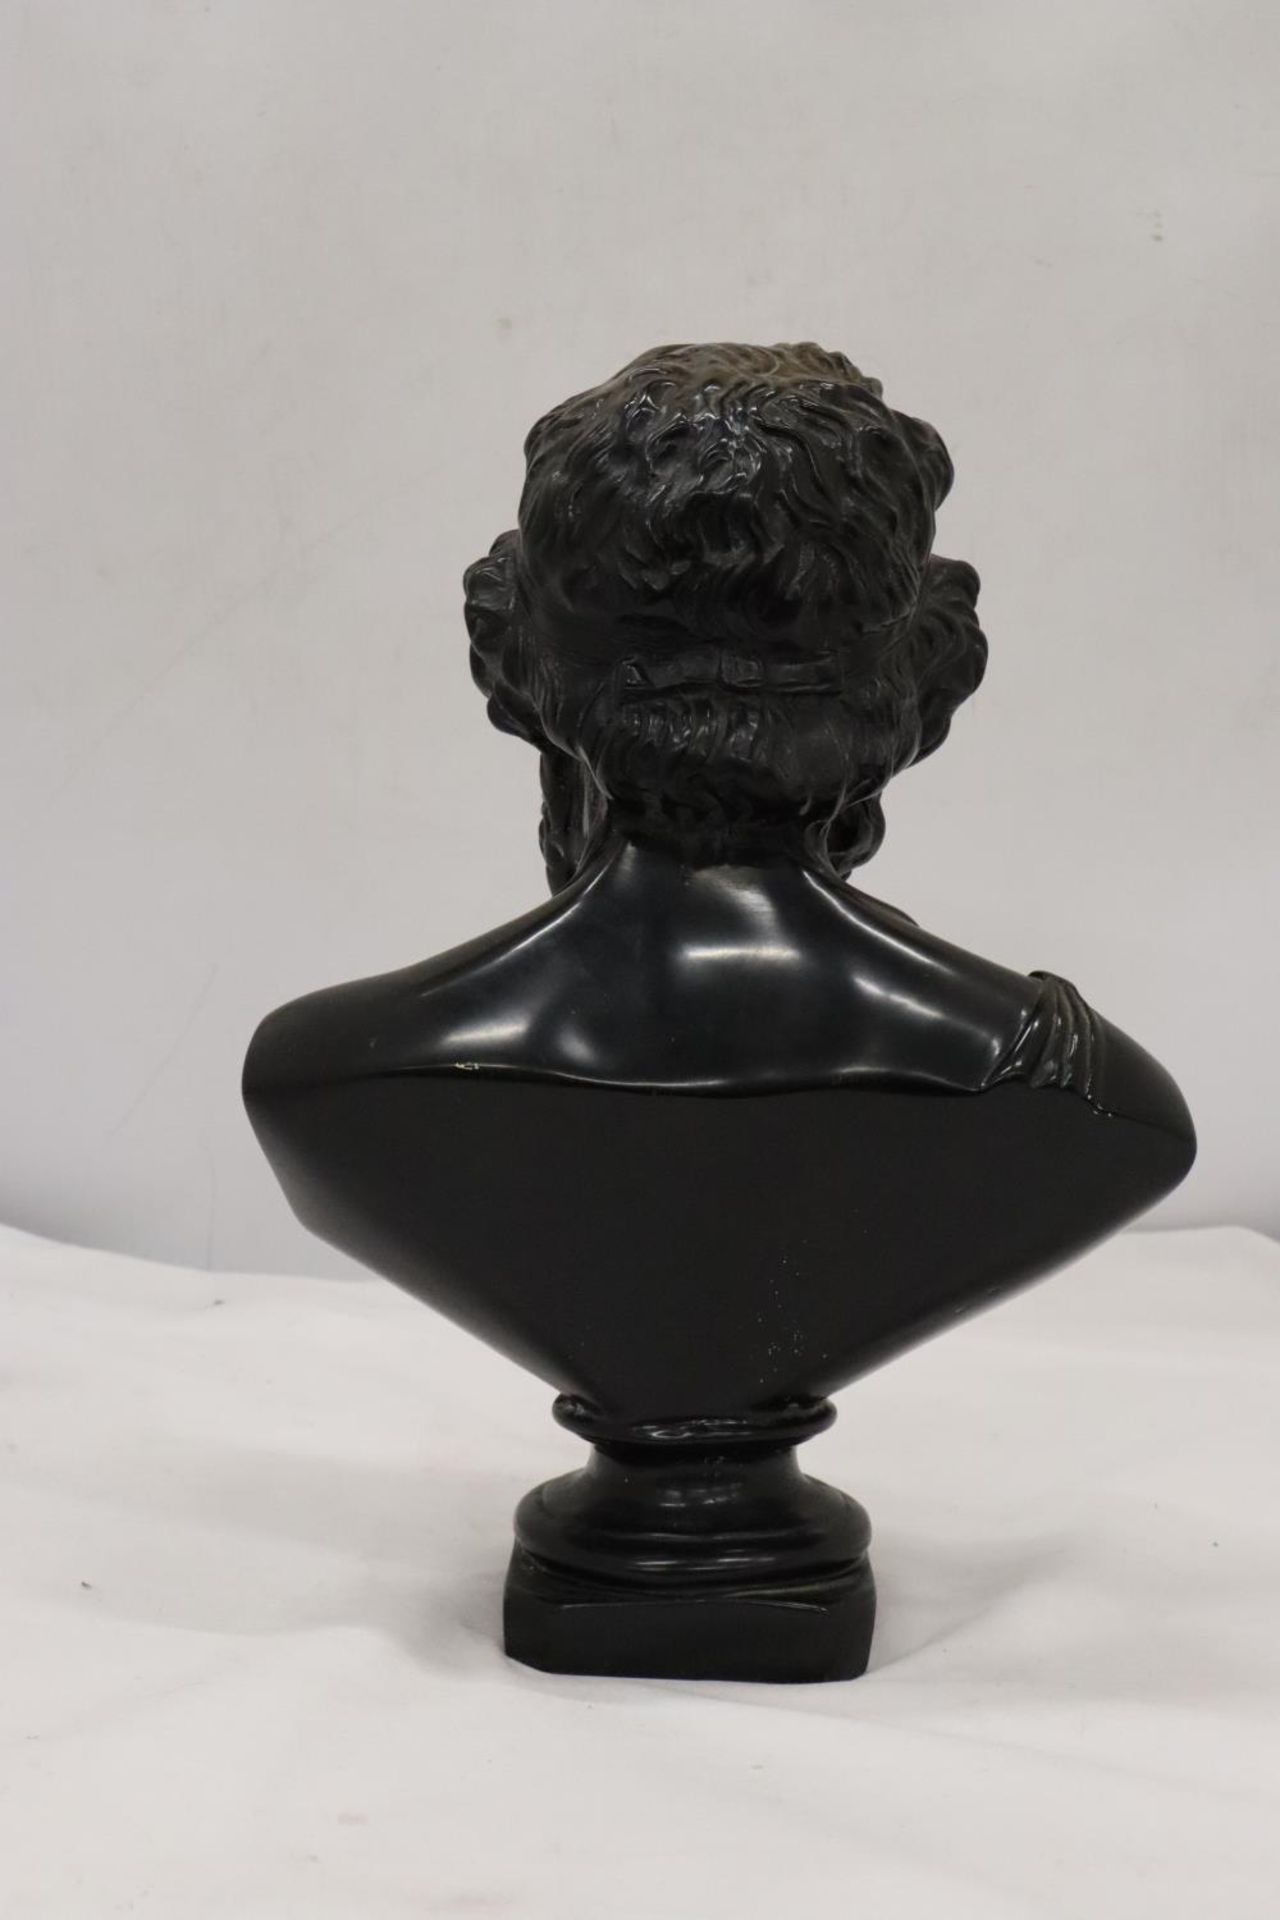 A HEAVY RESIN BUST OF CLASSICAL GREEK POET TITLED - 'HOMERE', HEIGHT 30 CM - Image 3 of 4